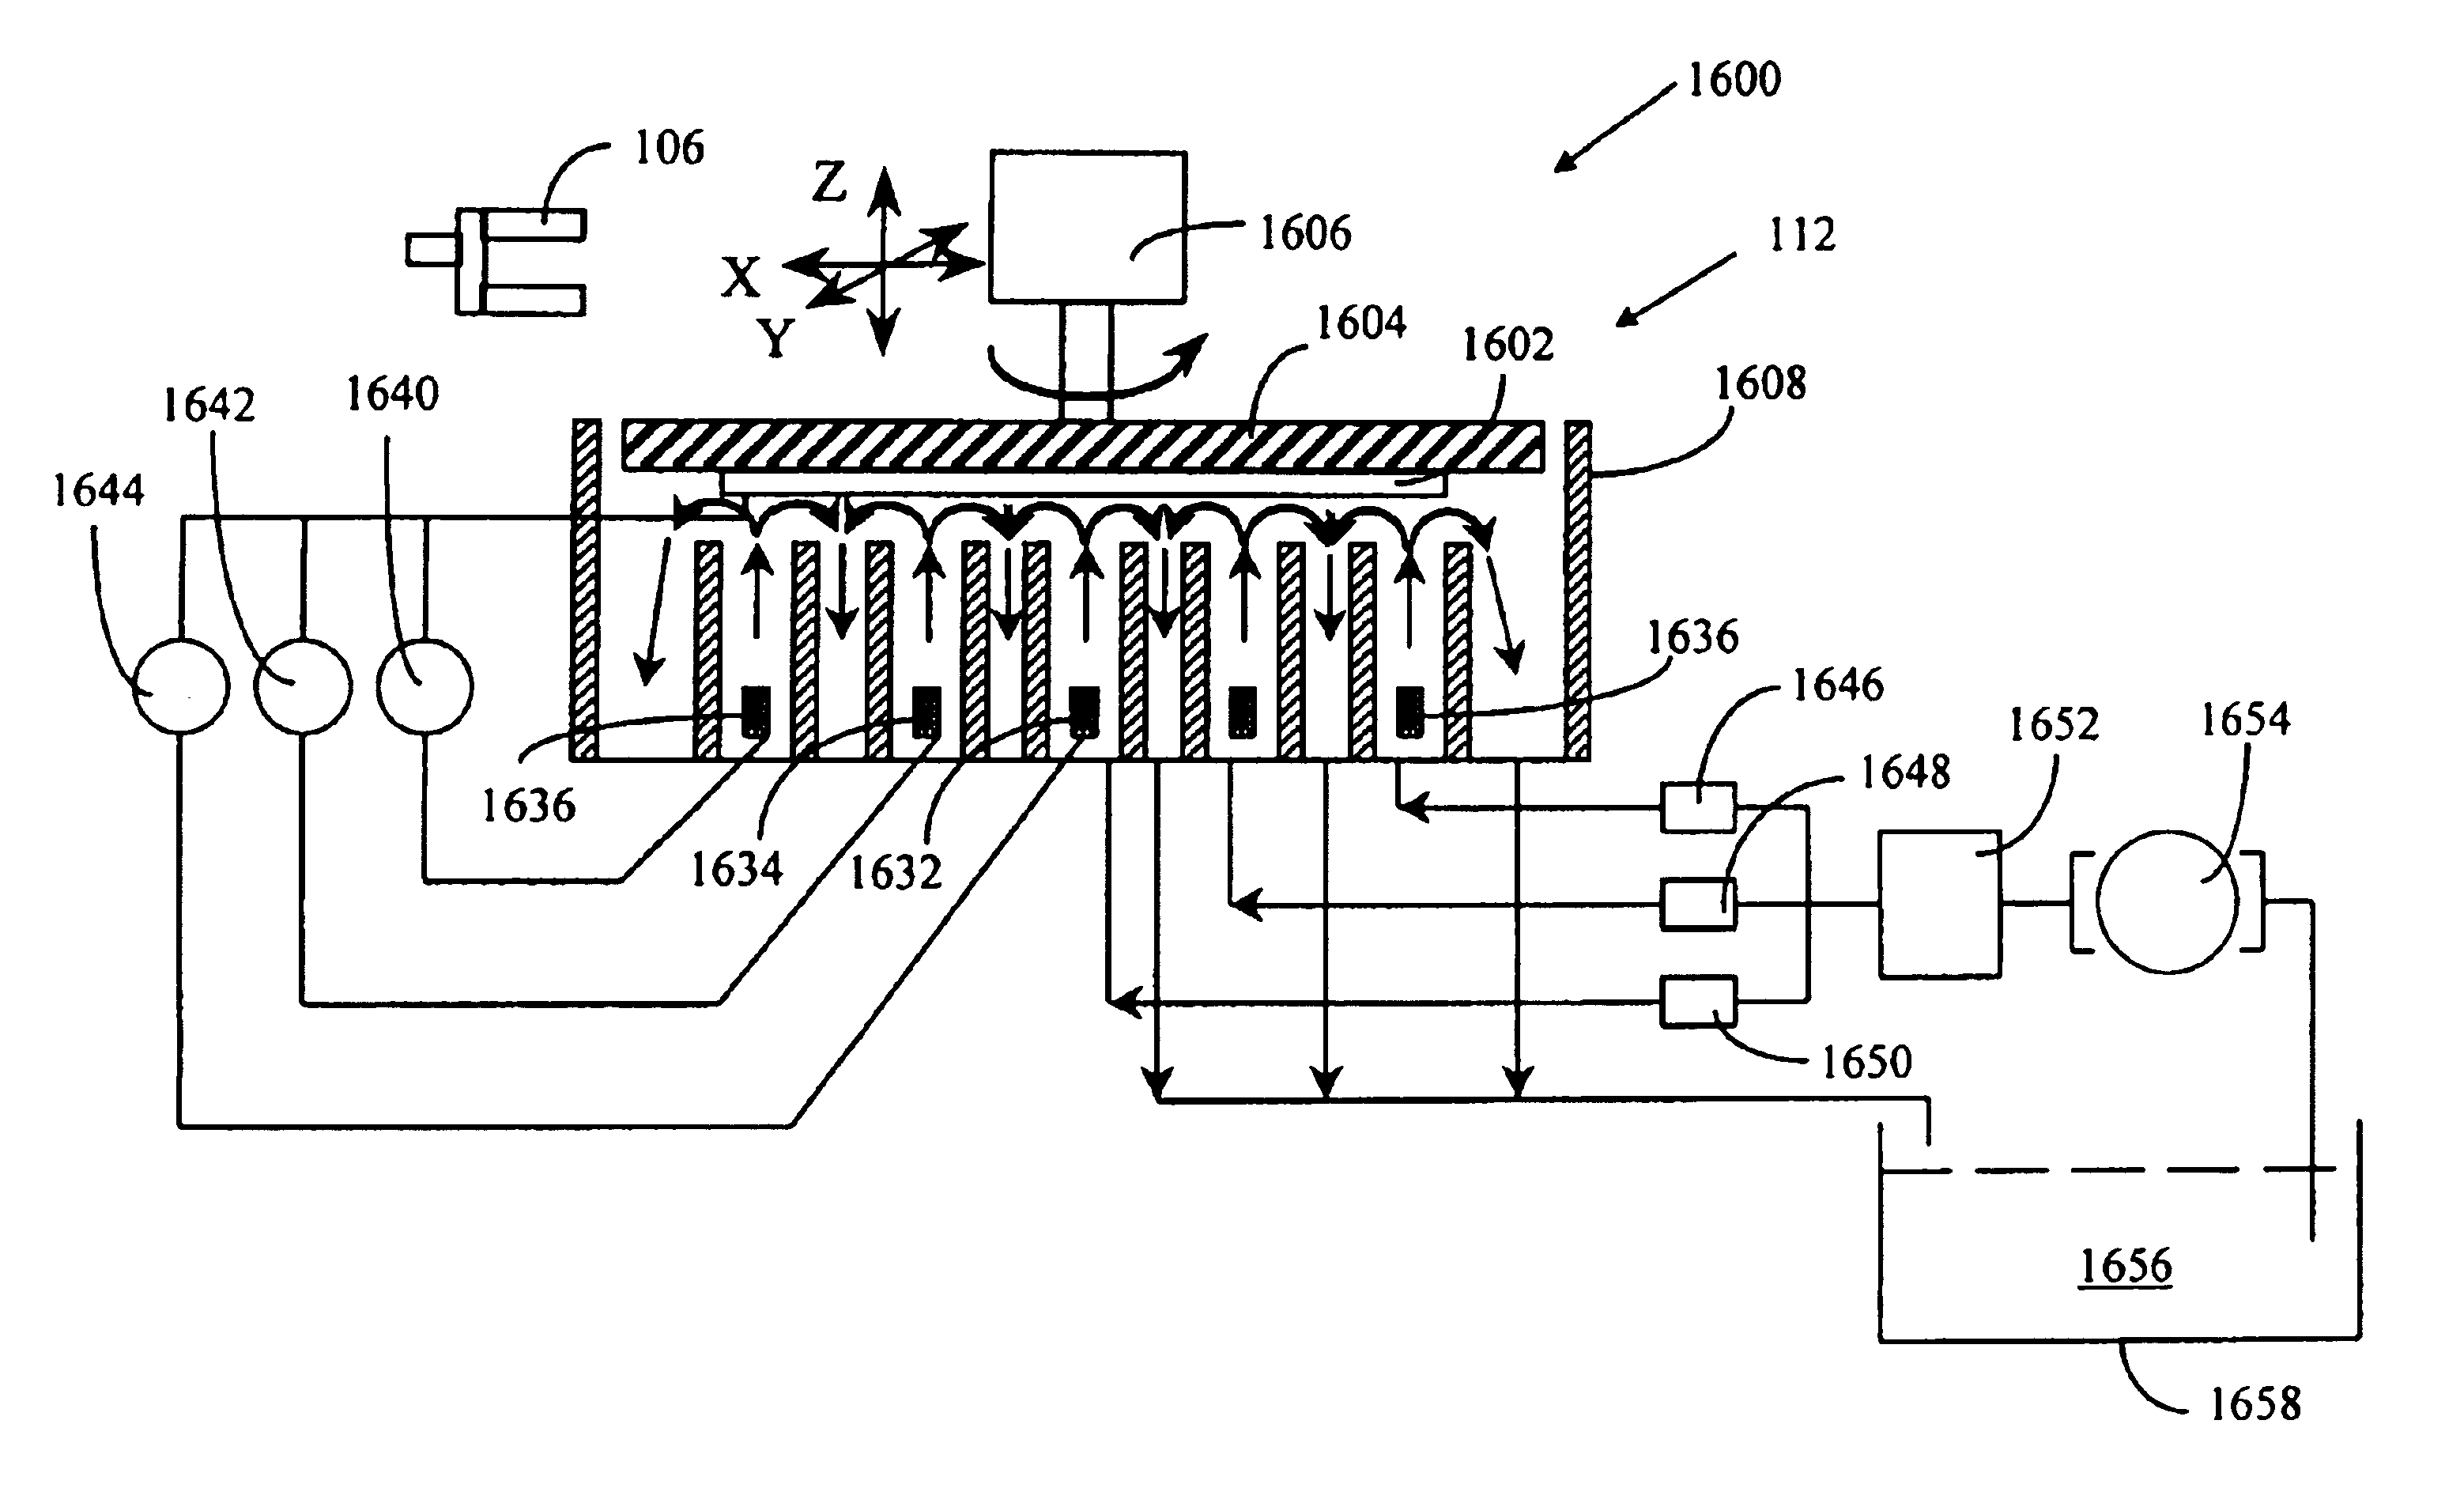 Methods and apparatus for holding and positioning semiconductor workpieces during electropolishing and/or electroplating of the workpieces